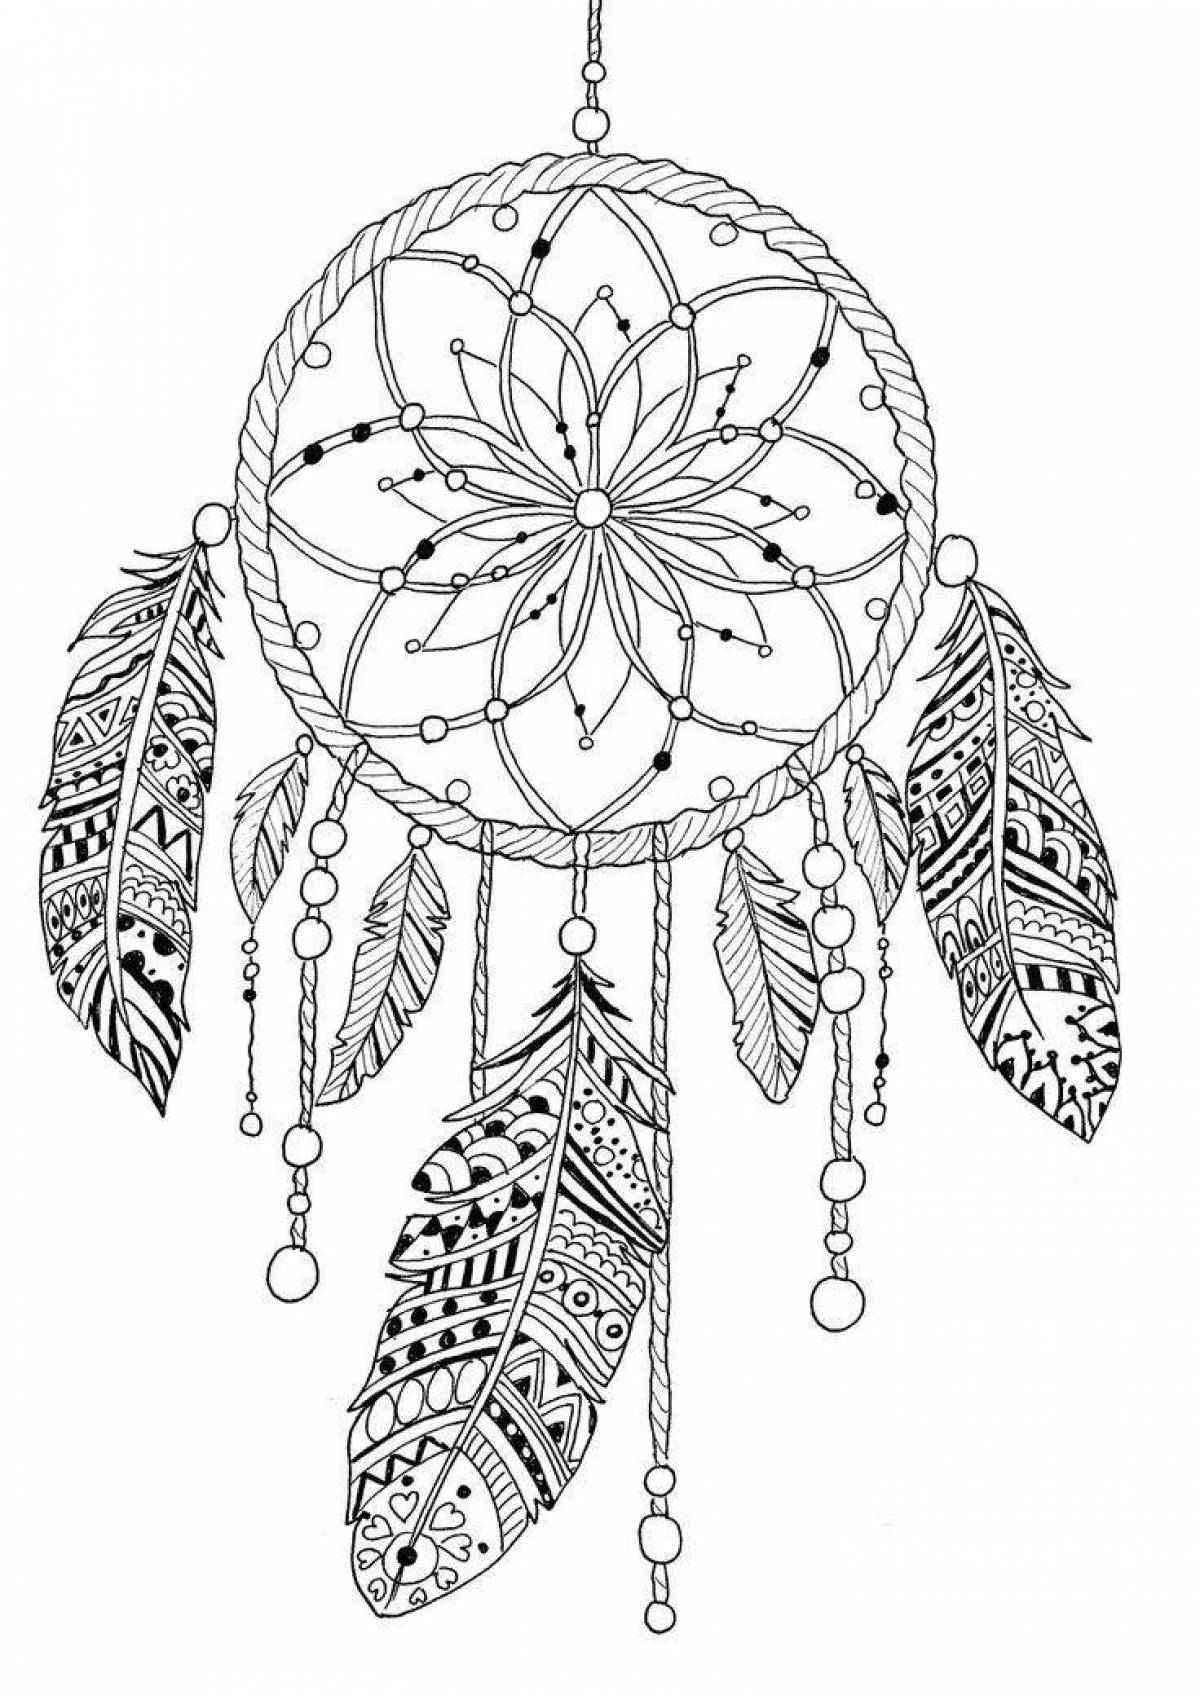 Intricate dreamcatcher coloring page